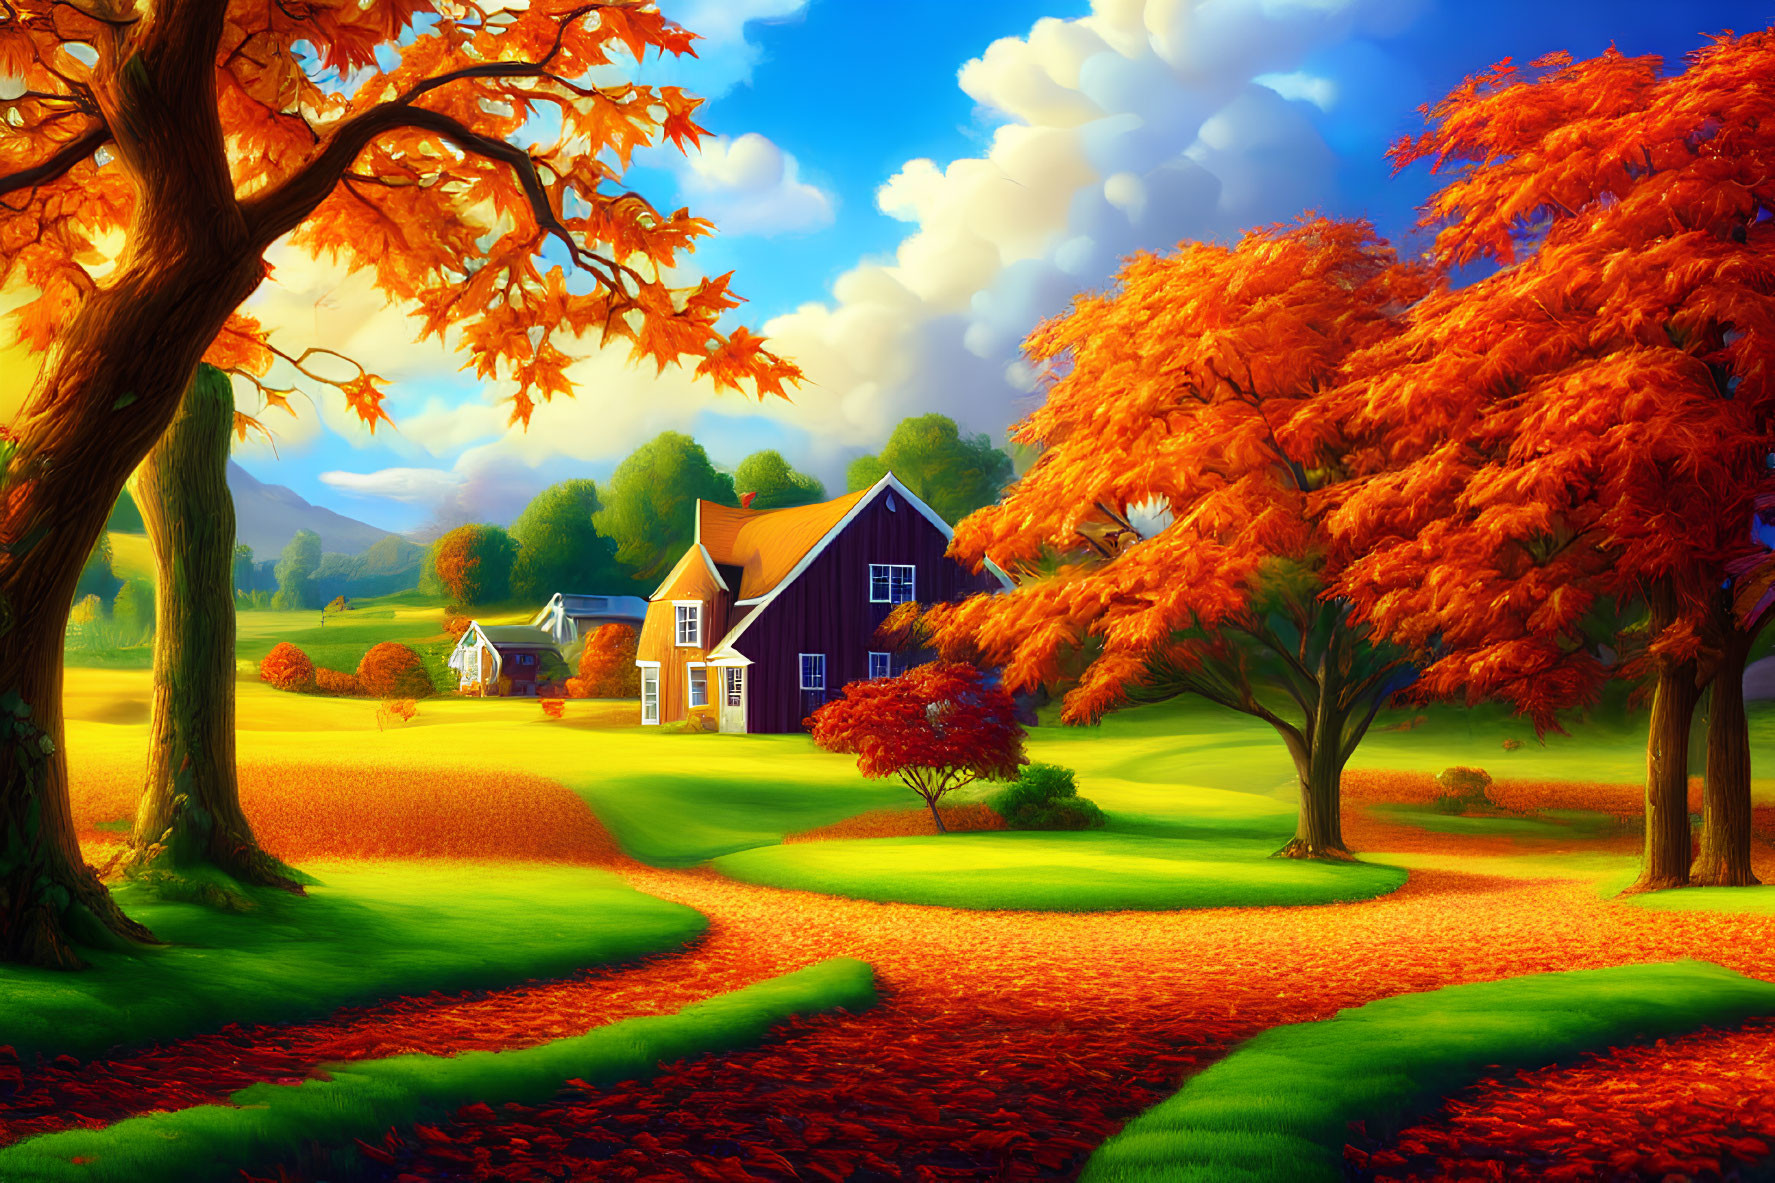 Scenic autumn landscape with orange trees, blue house, green fields, and fluffy clouds